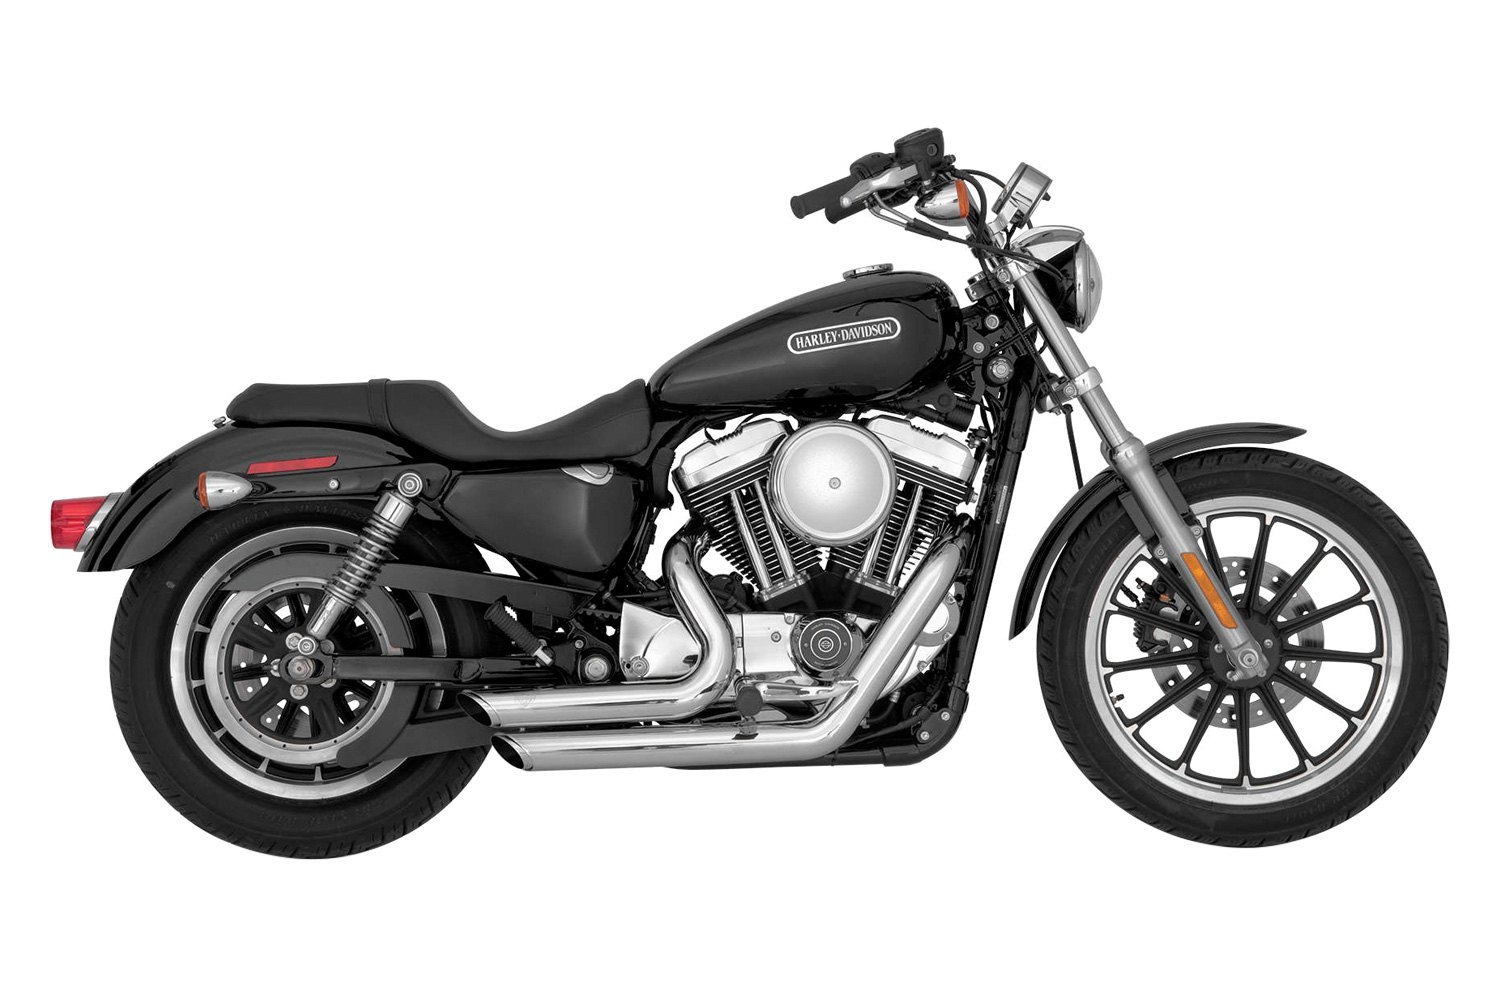 Vance & Hines ® 17219 - Shortshots 2-2 Chrome Staggered Exhaust System.